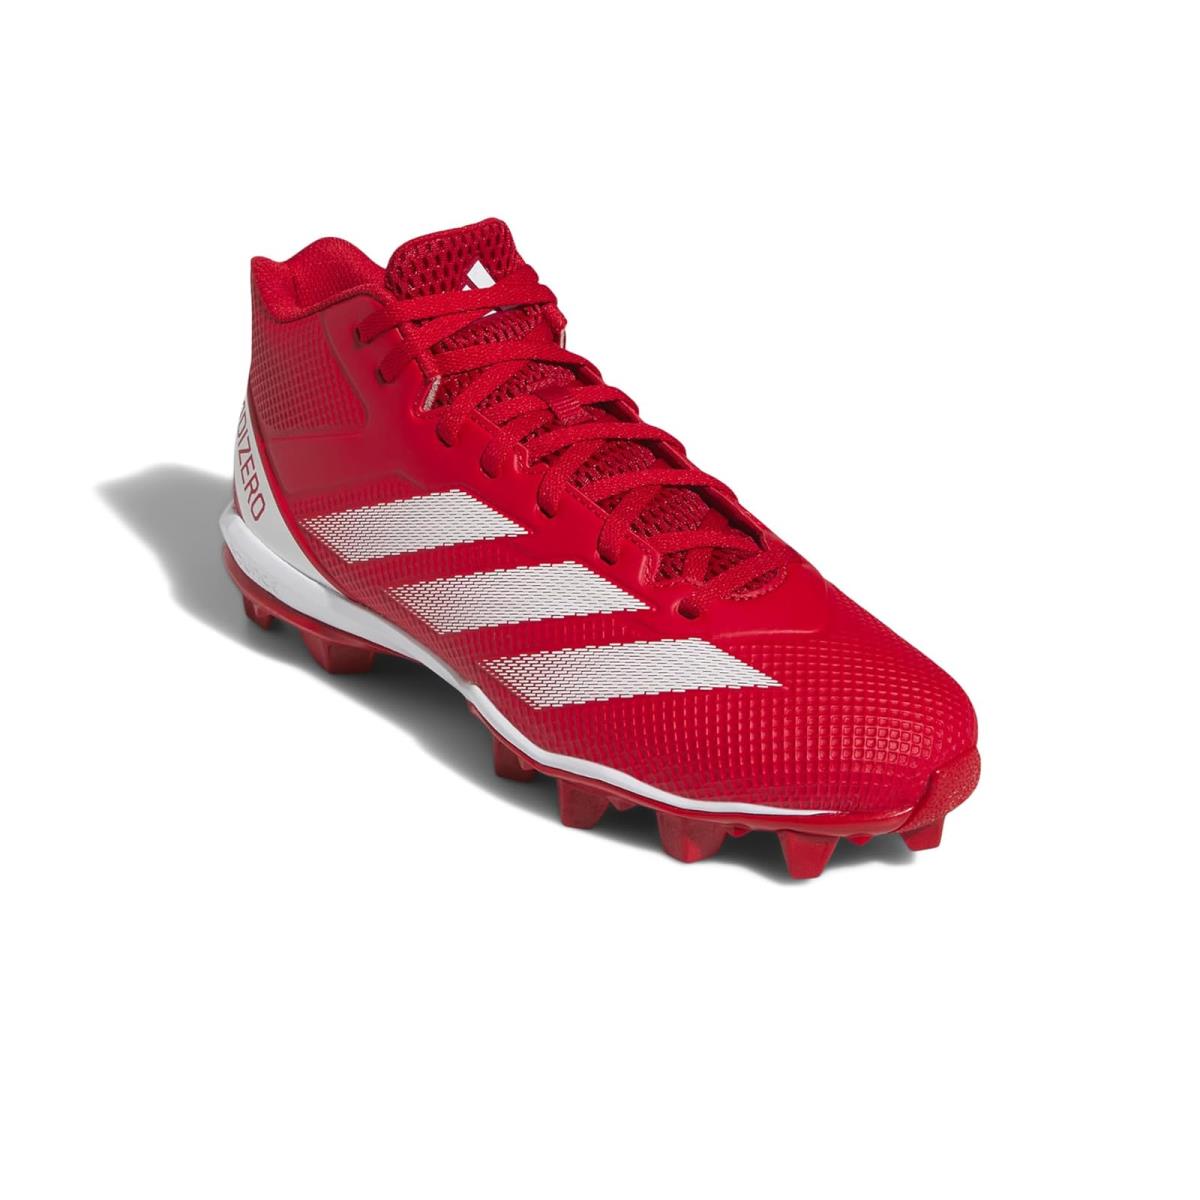 Man`s Sneakers Athletic Shoes Adidas Adizero Impact Spark Mid Team Power Red/White/Team Power Red